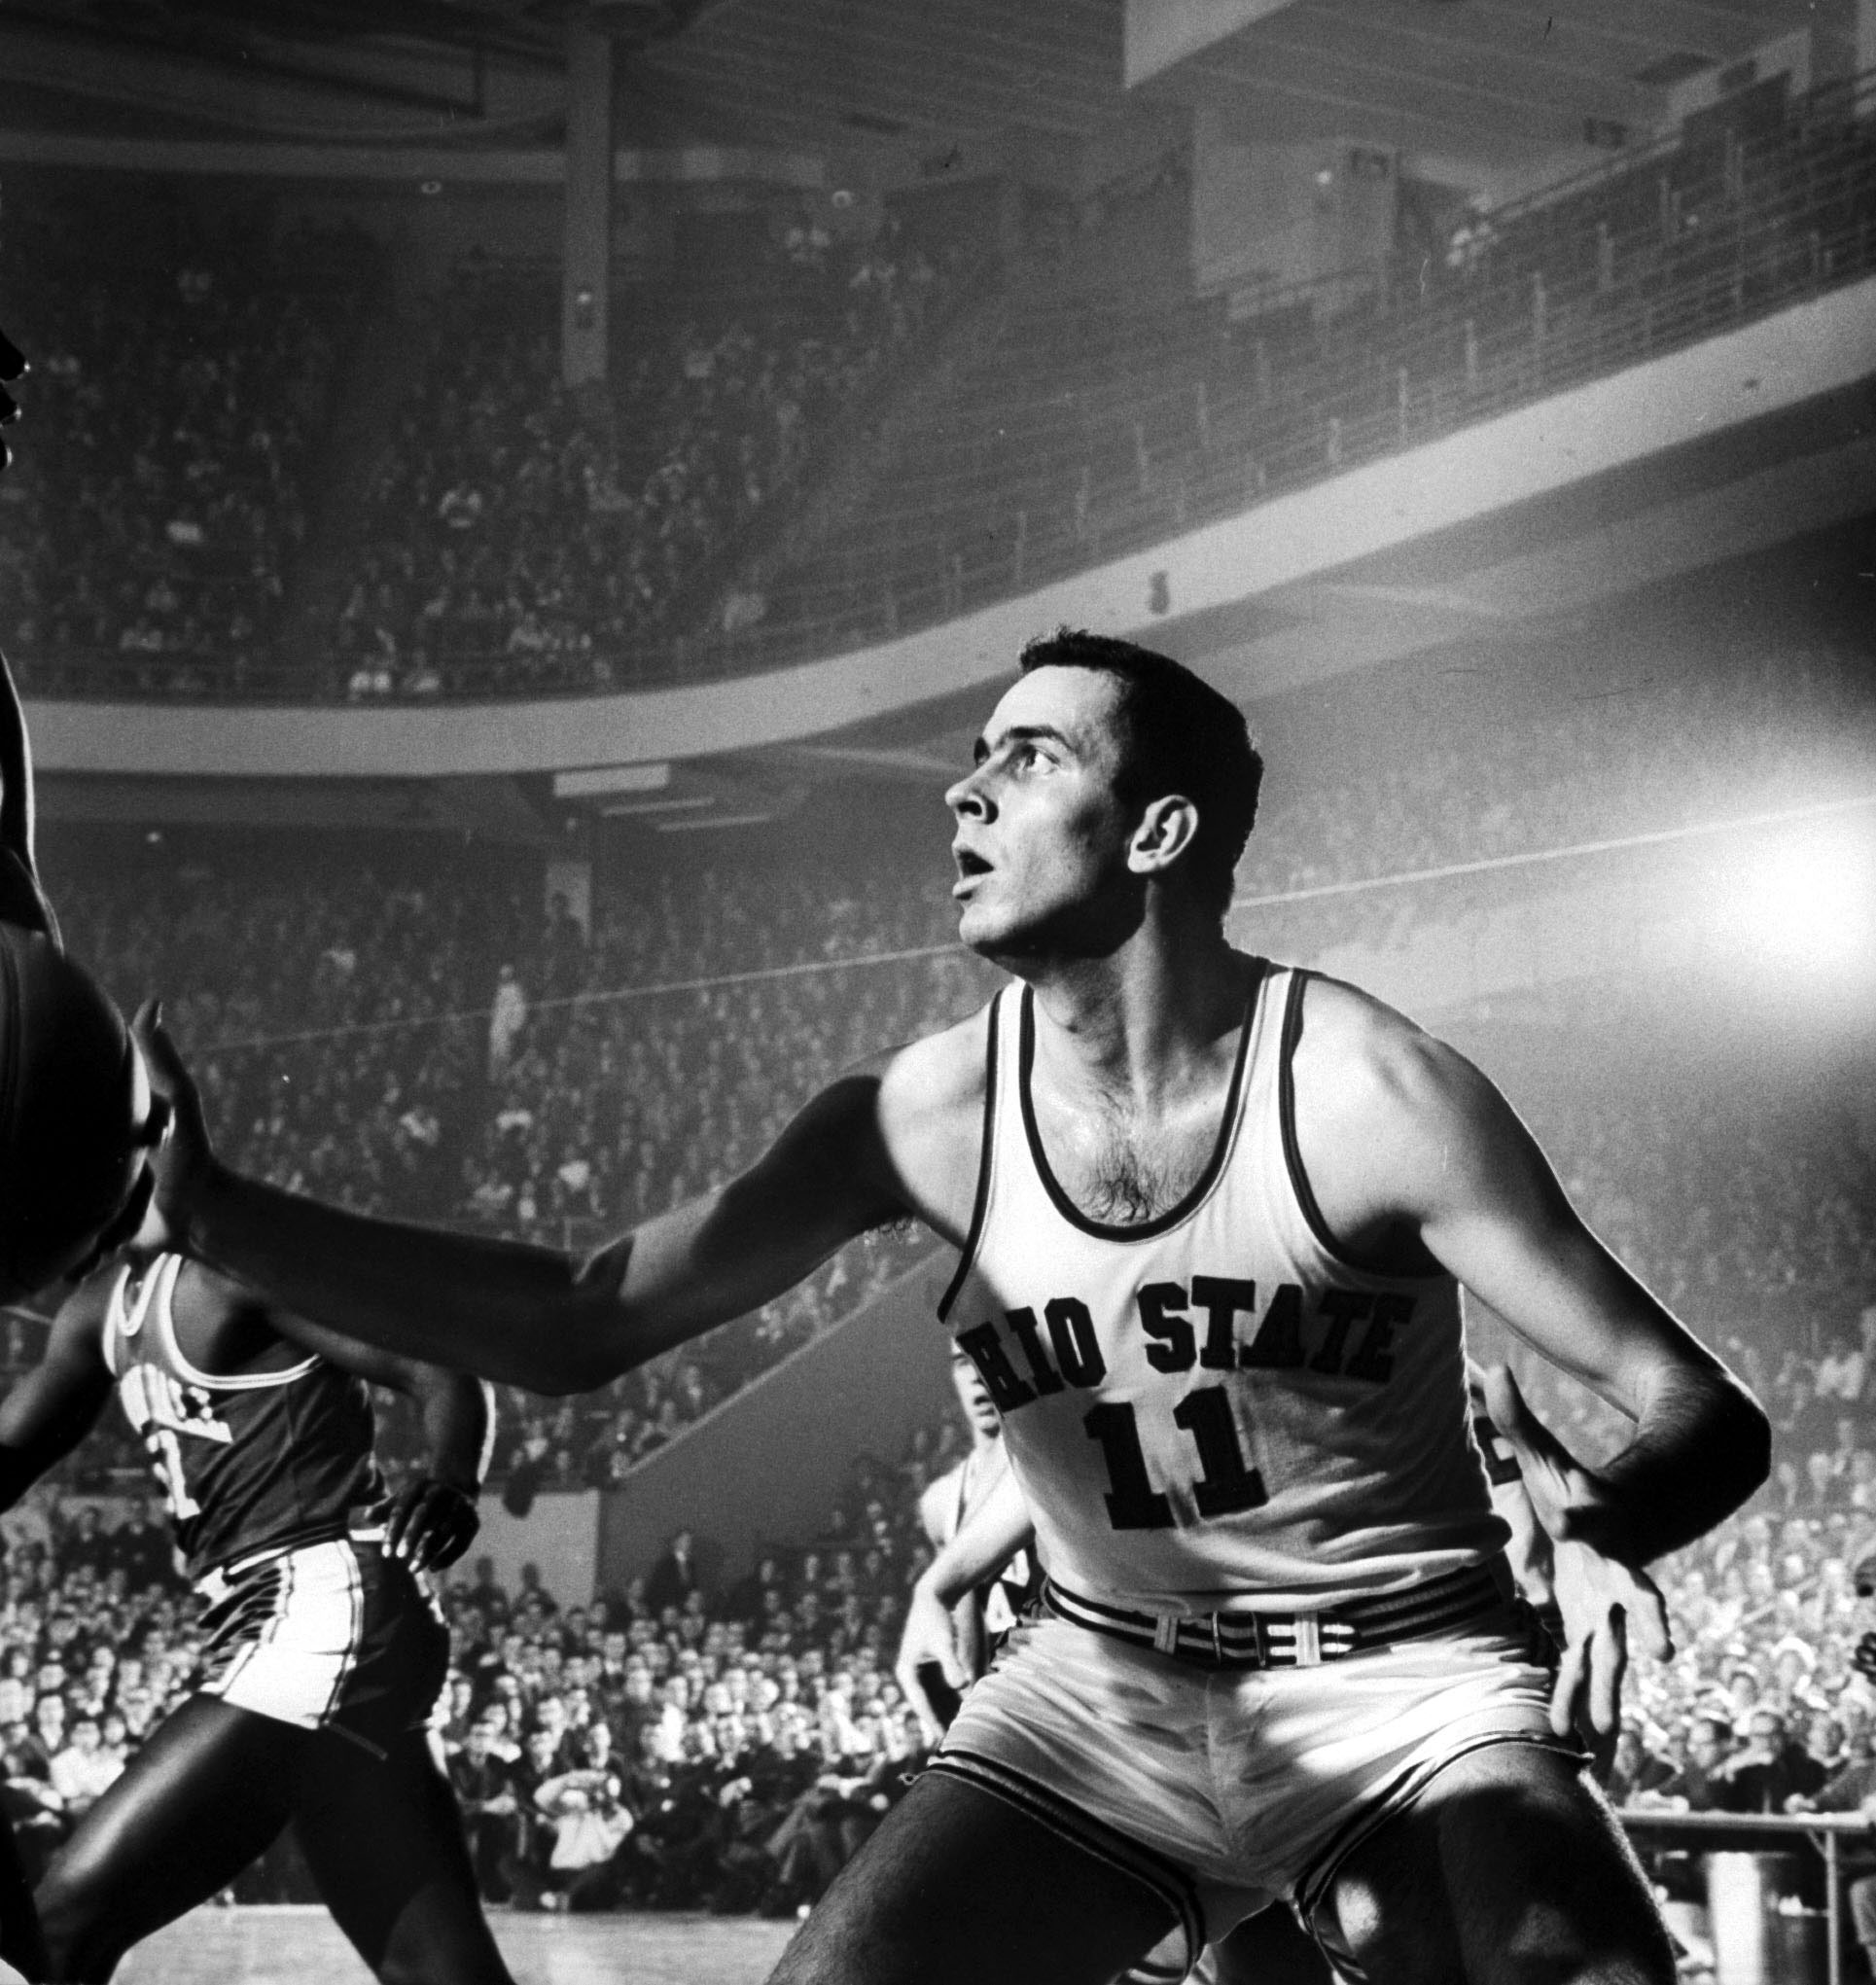 The 6' 8" Jerry Lucas (above, in 1960) is still regarded as one of the best big men in the history of the game. In three college seasons with Ohio State he averaged 24.3 points and 17.2 rebounds and led the Buckeyes to three NCAA title games. They won it all in 1960.